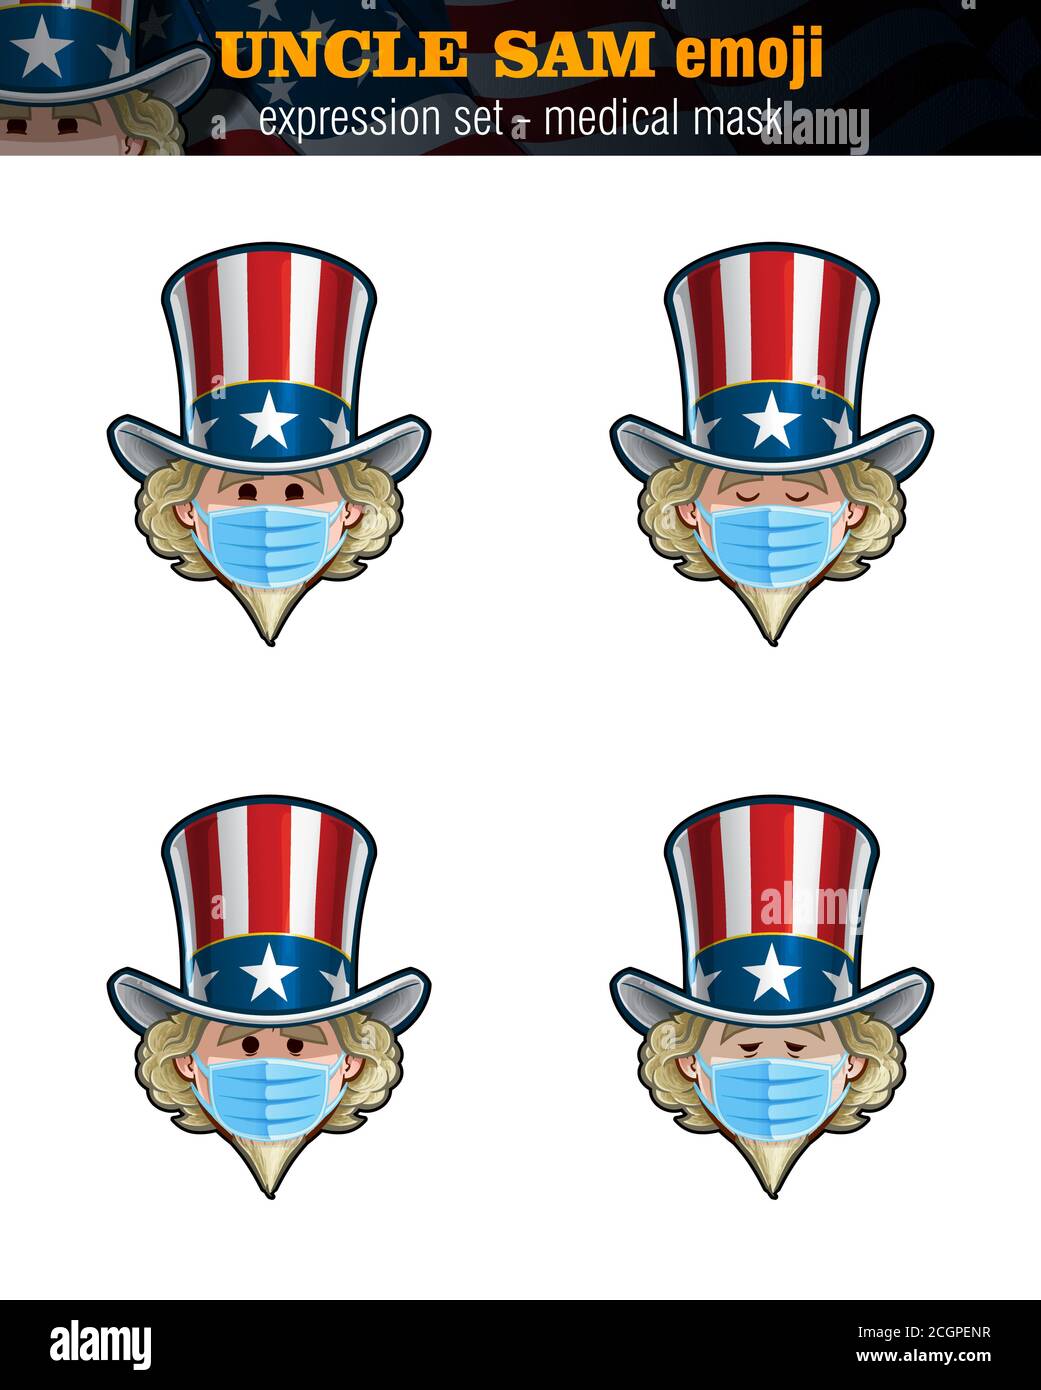 Vector illustrations Set of cartoon Uncle Sam Emoji, wearing surgical mask. Four expressions, happy, serous, concerned, sick – ill. Elements on well-d Stock Vector